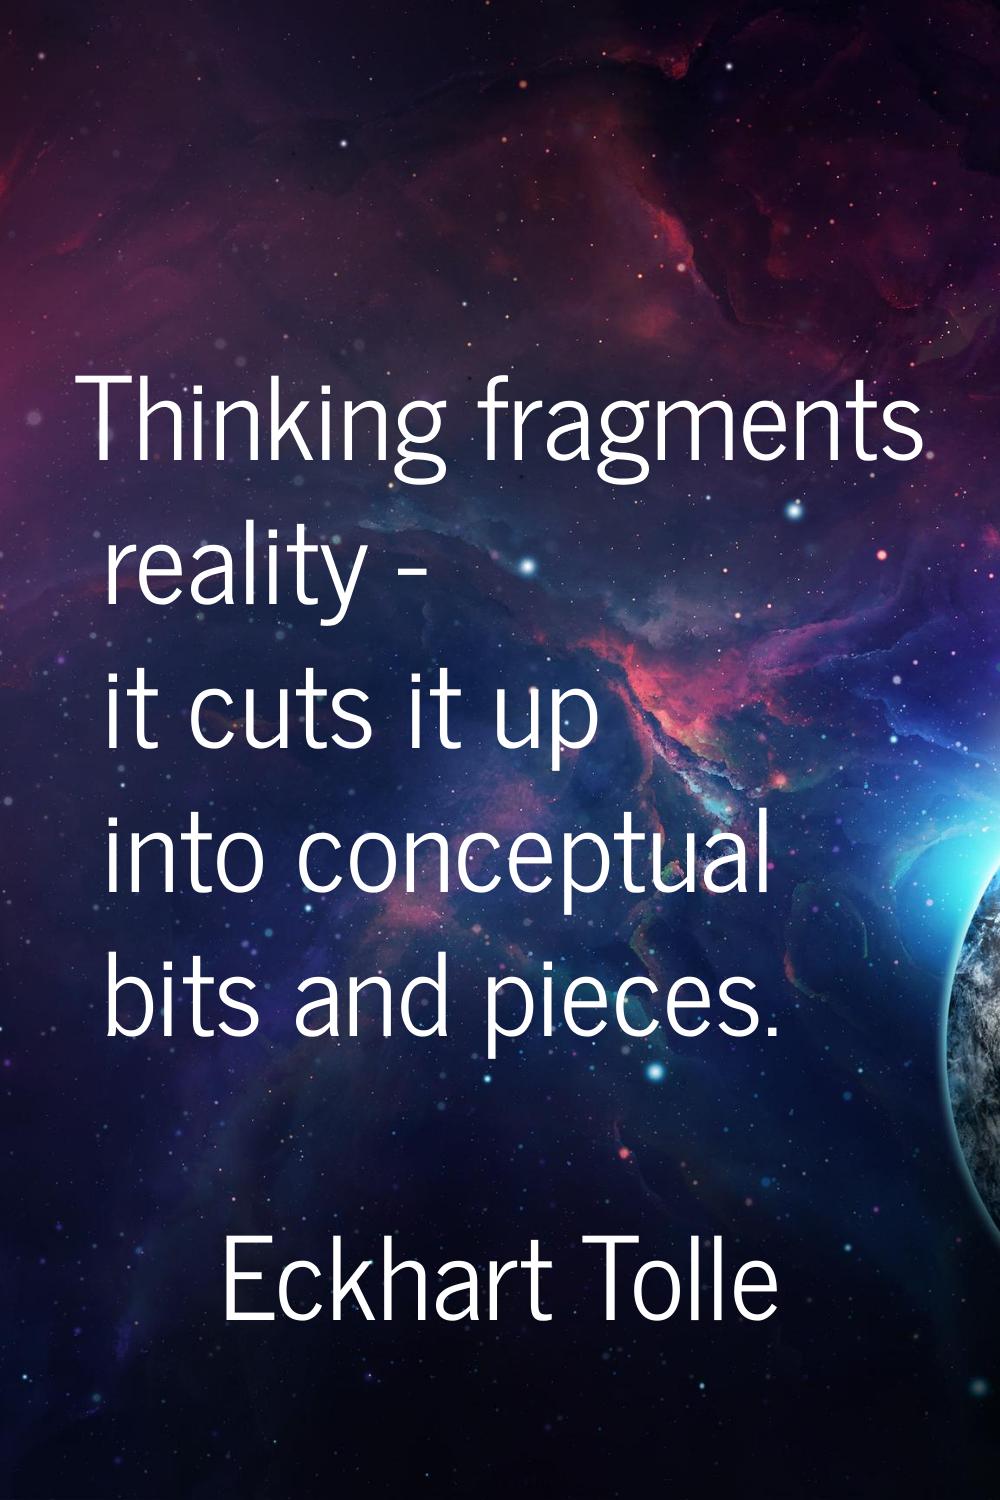 Thinking fragments reality - it cuts it up into conceptual bits and pieces.